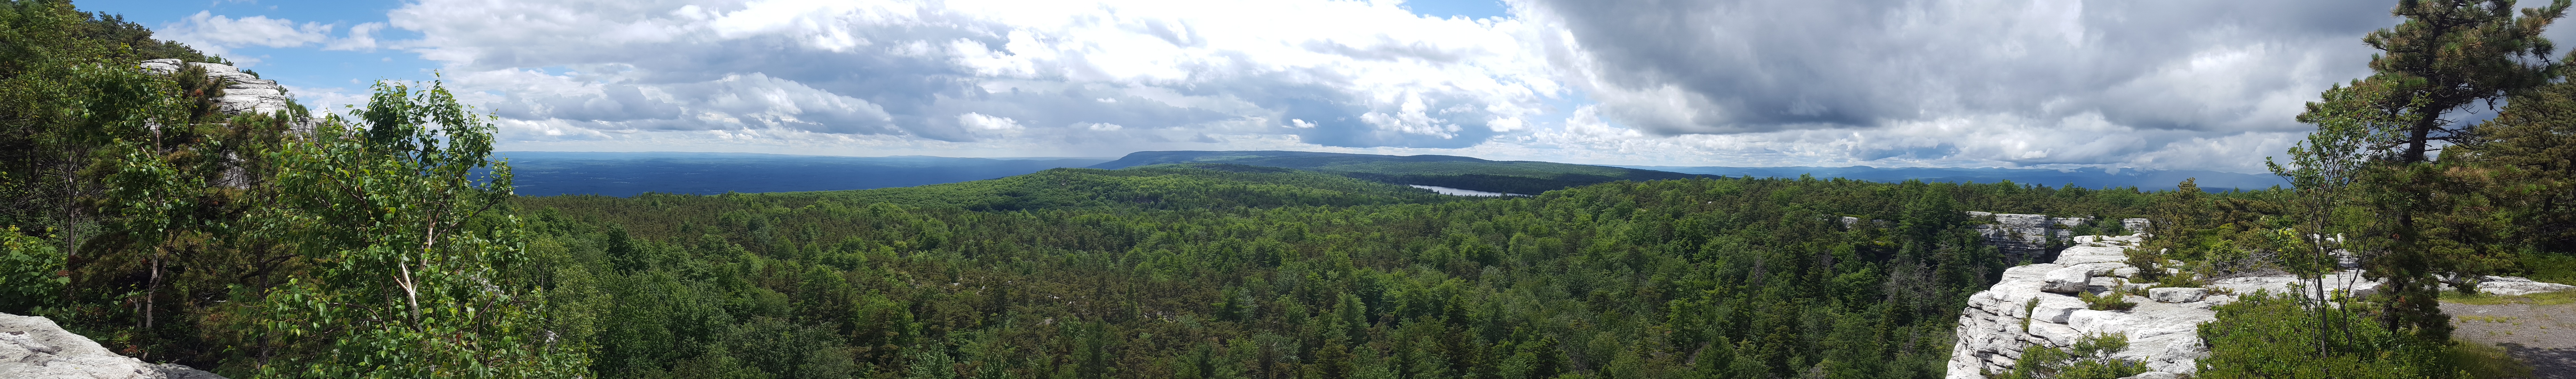 View from Castle Point Trail, Minnewaska State Park, New York